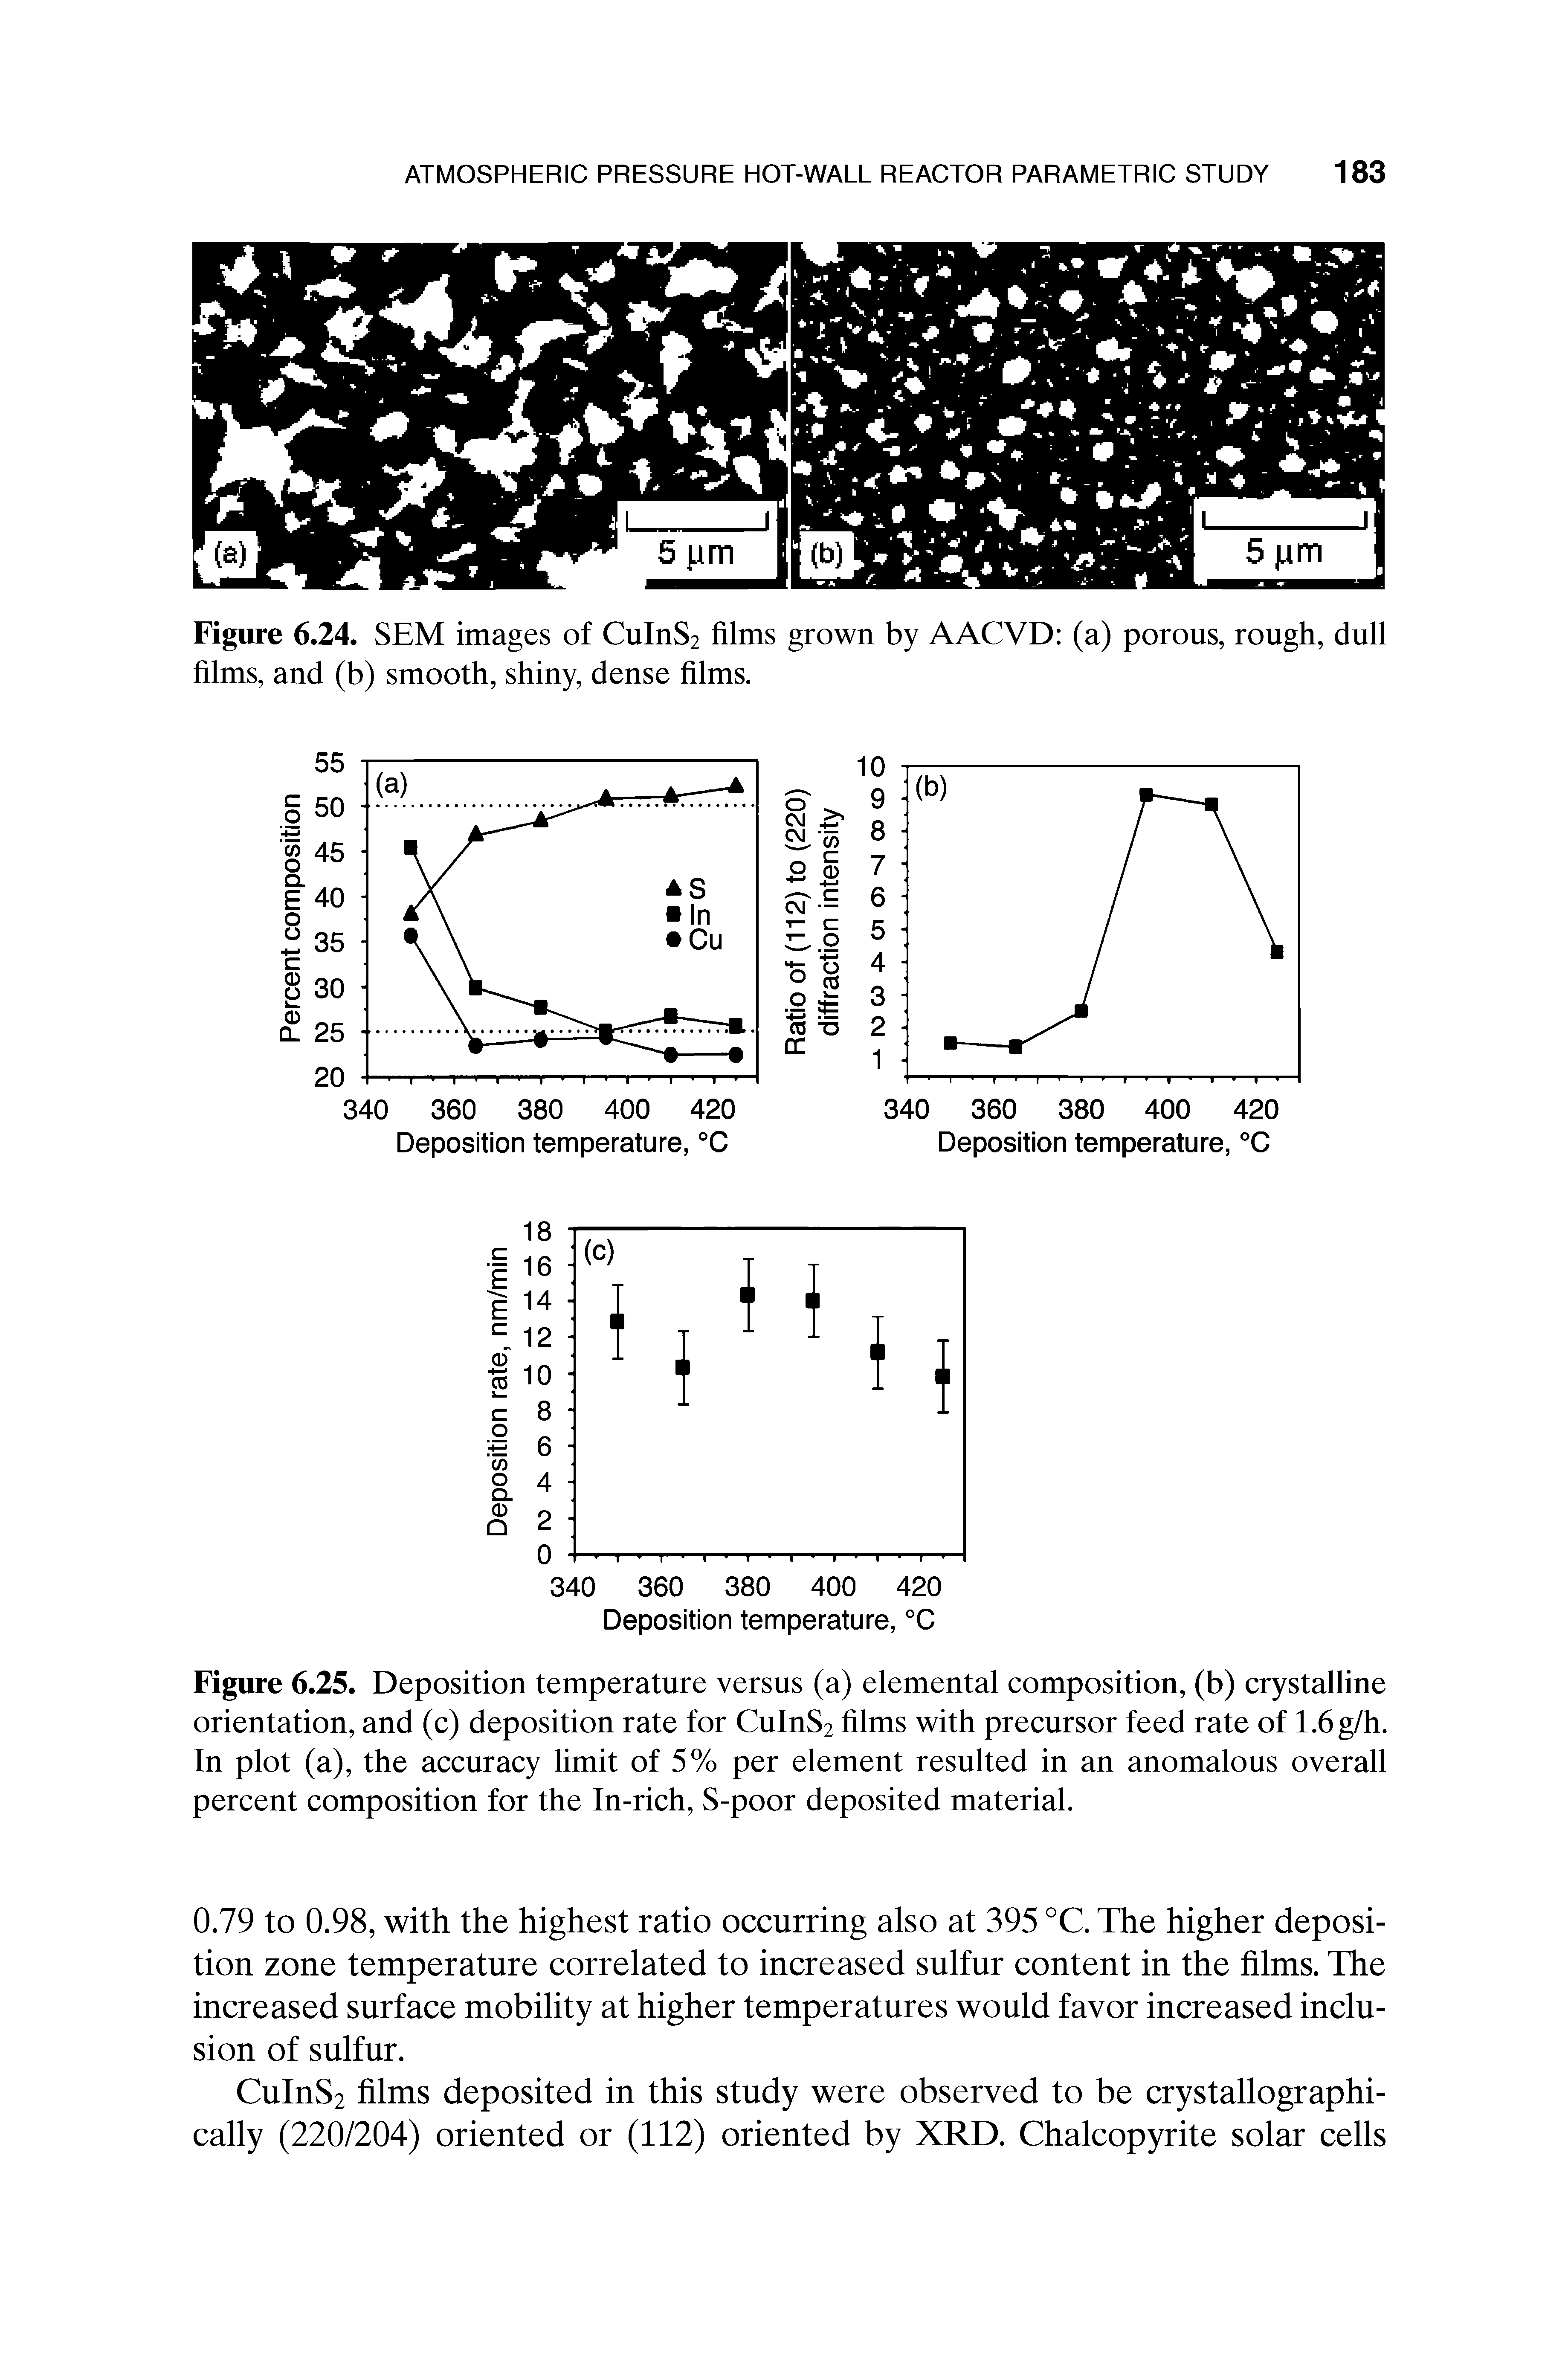 Figure 6.25. Deposition temperature versus (a) elemental composition, (b) crystalline orientation, and (c) deposition rate for CuInS2 films with precursor feed rate of 1.6 g/h. In plot (a), the accuracy limit of 5% per element resulted in an anomalous overall percent composition for the In-rich, S-poor deposited material.